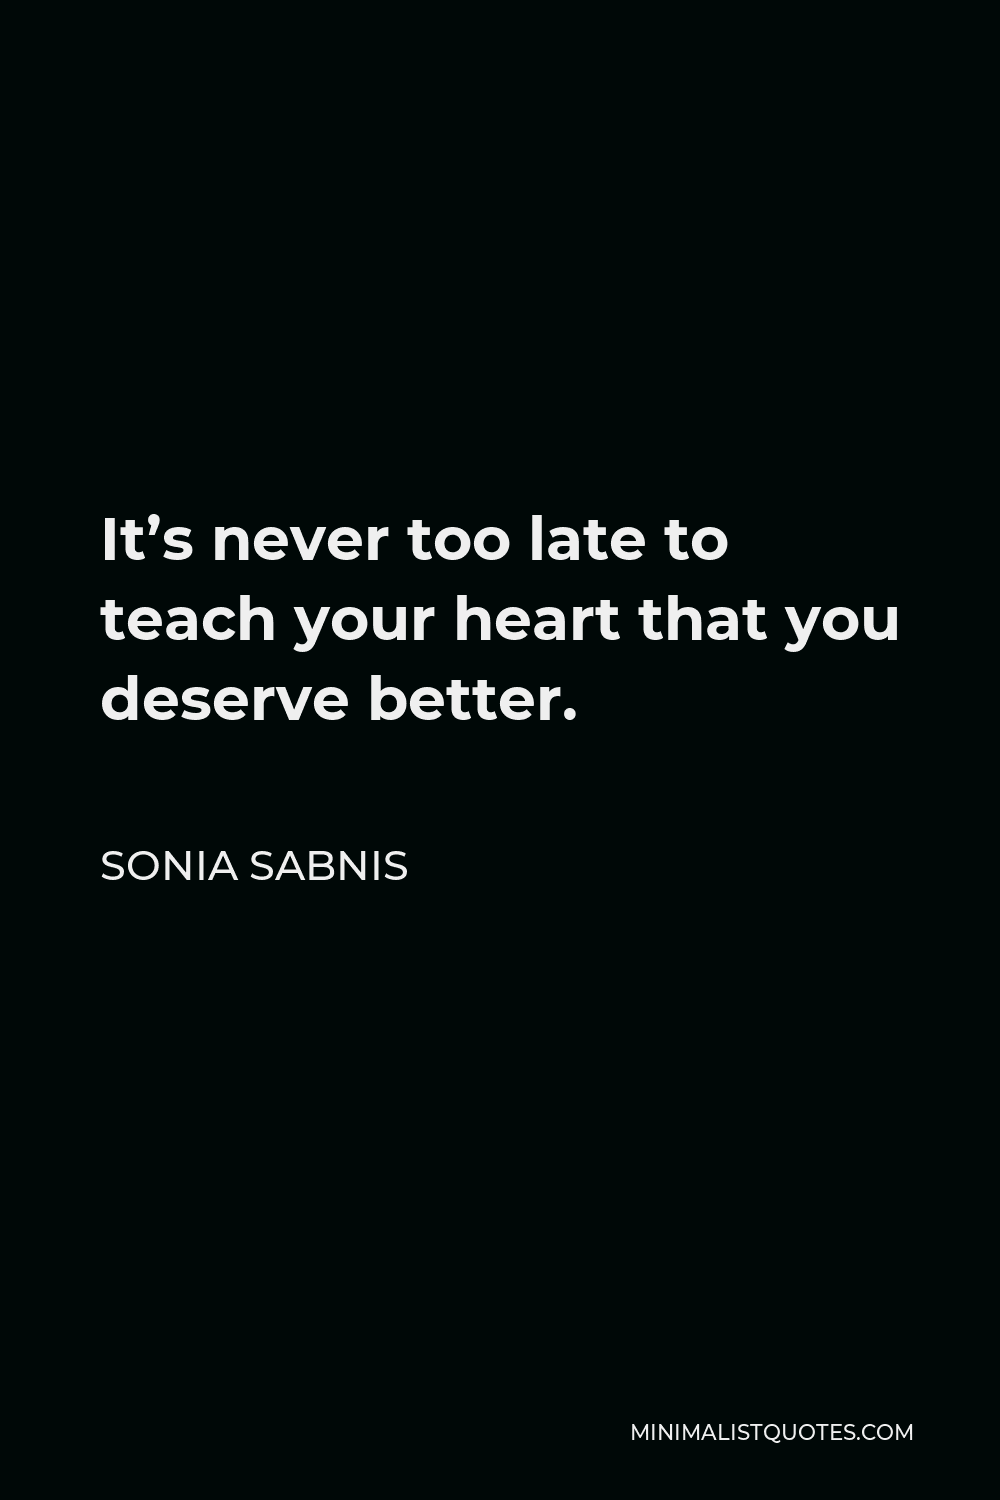 Sonia Sabnis Quote - It’s never too late to teach your heart that you deserve better.